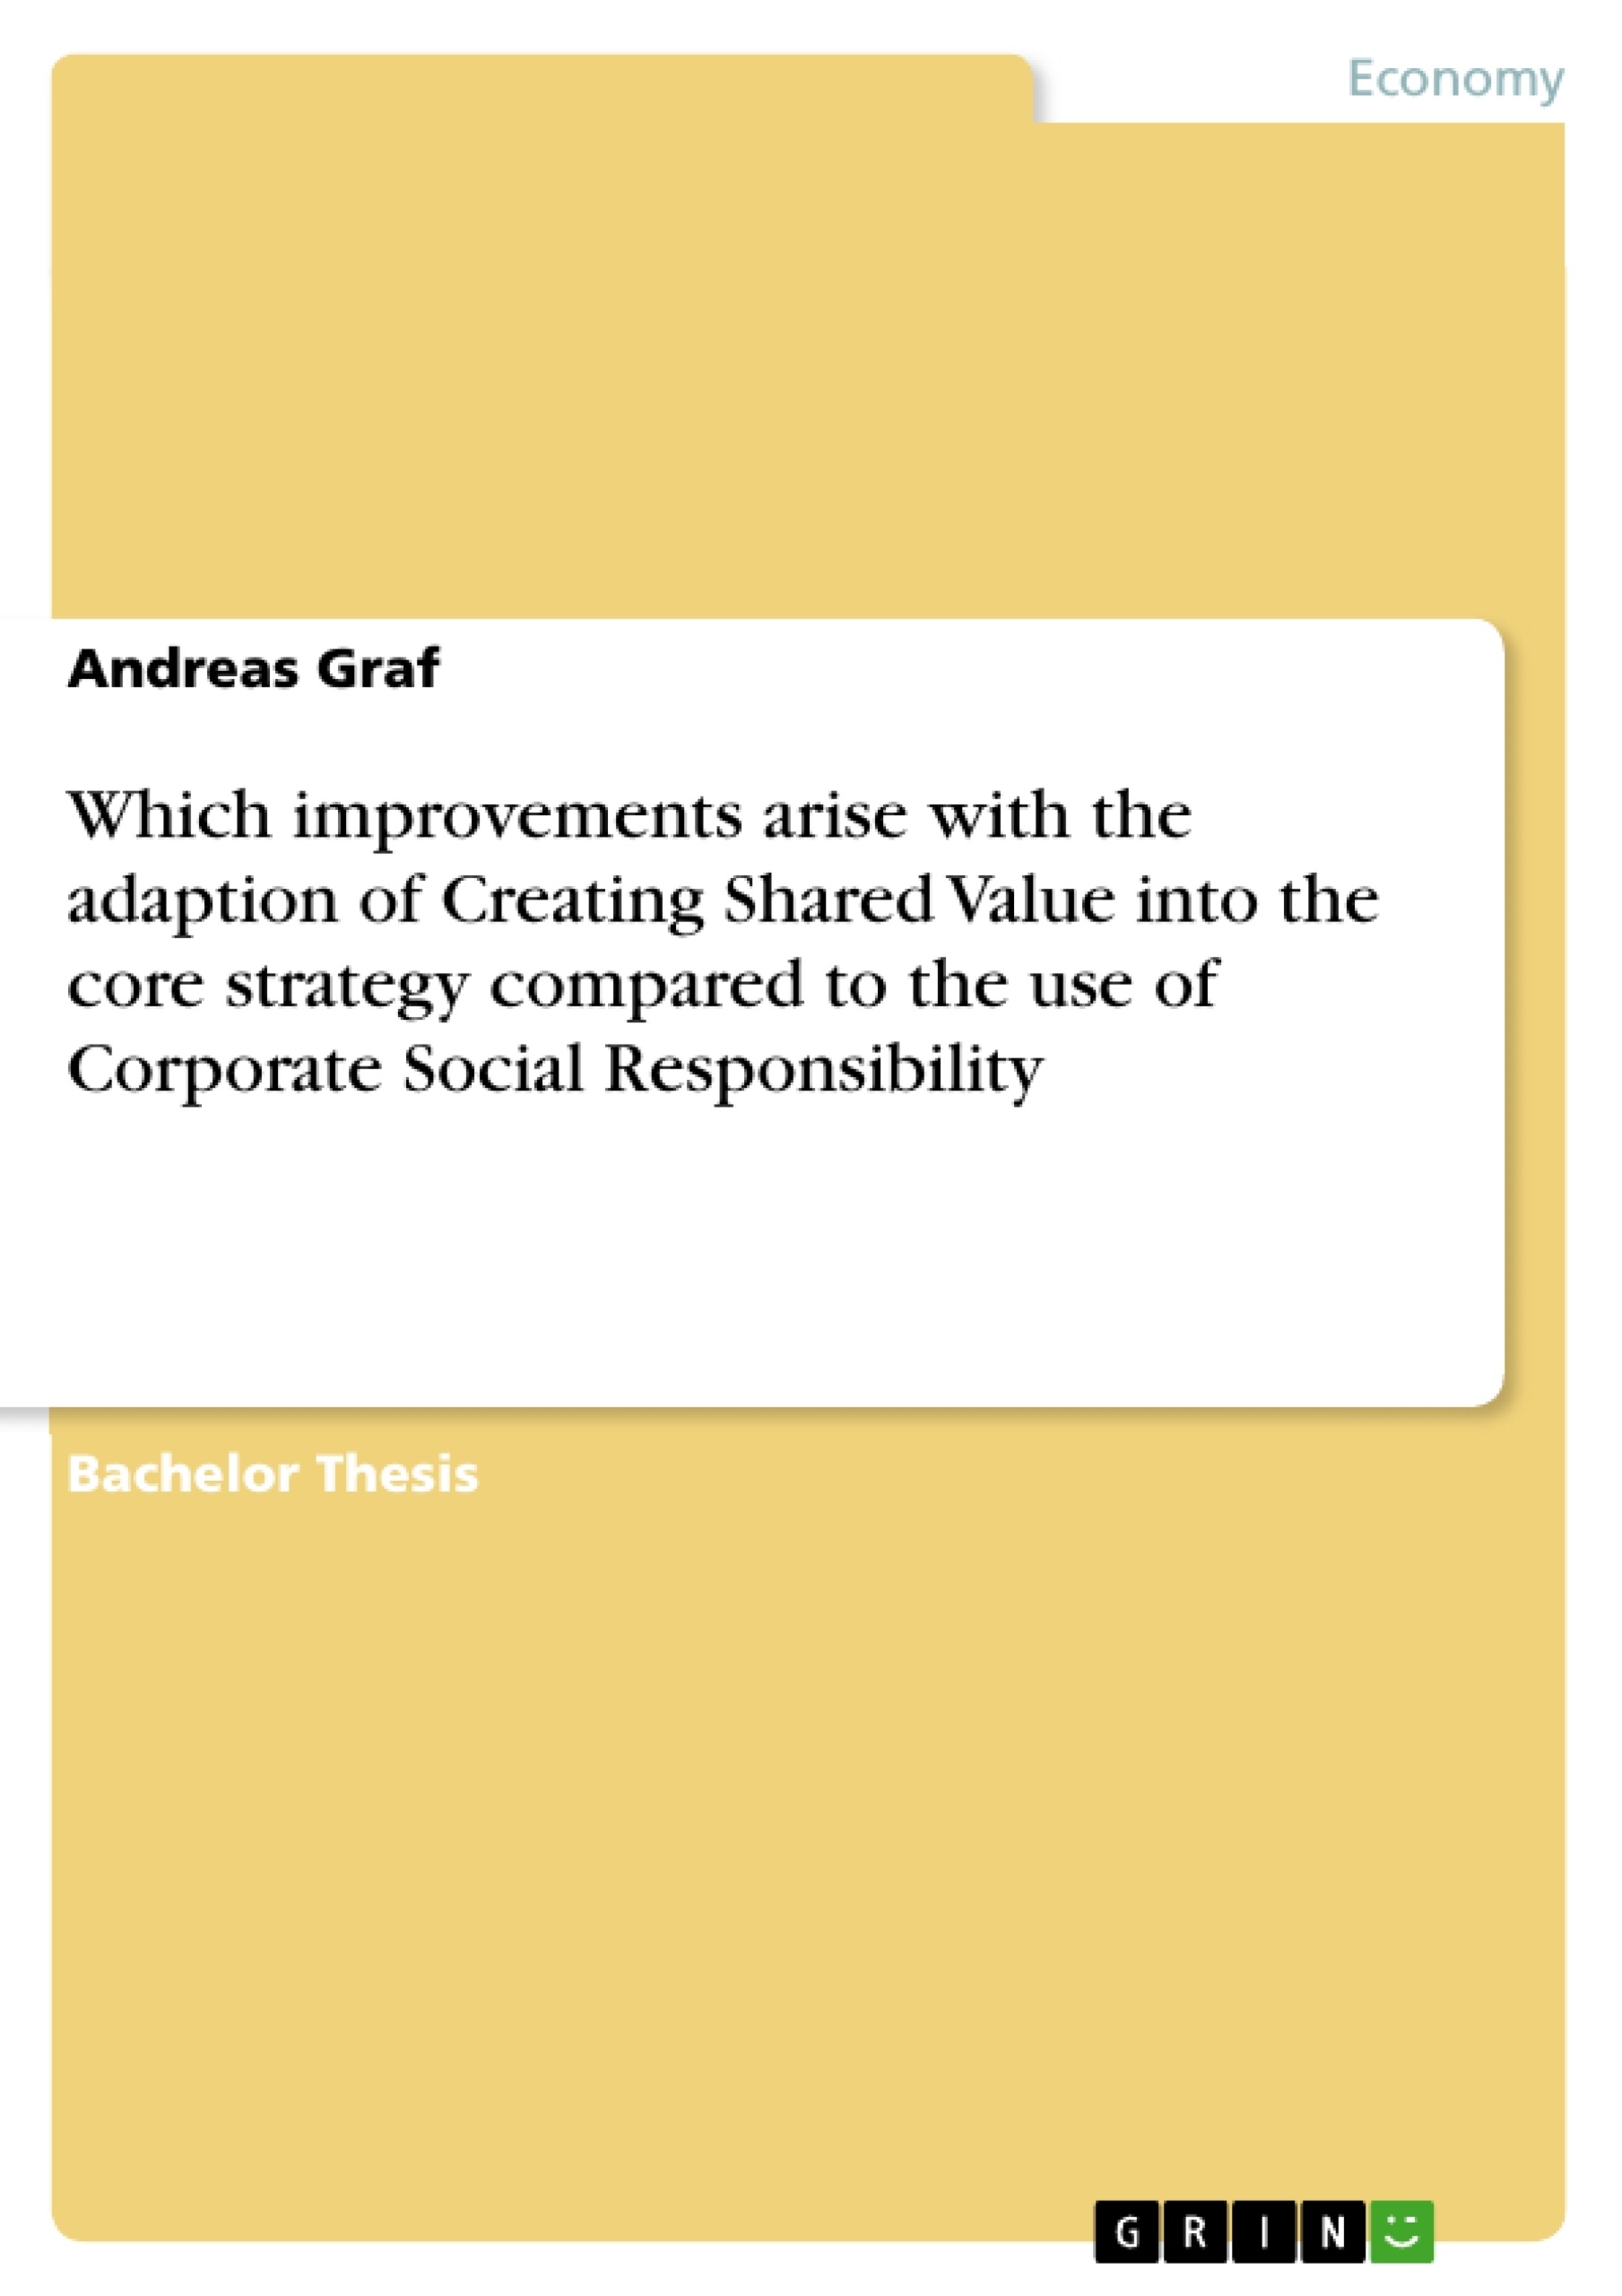 Título: Which improvements arise with the adaption of Creating Shared Value into the core strategy compared to the use of Corporate Social Responsibility